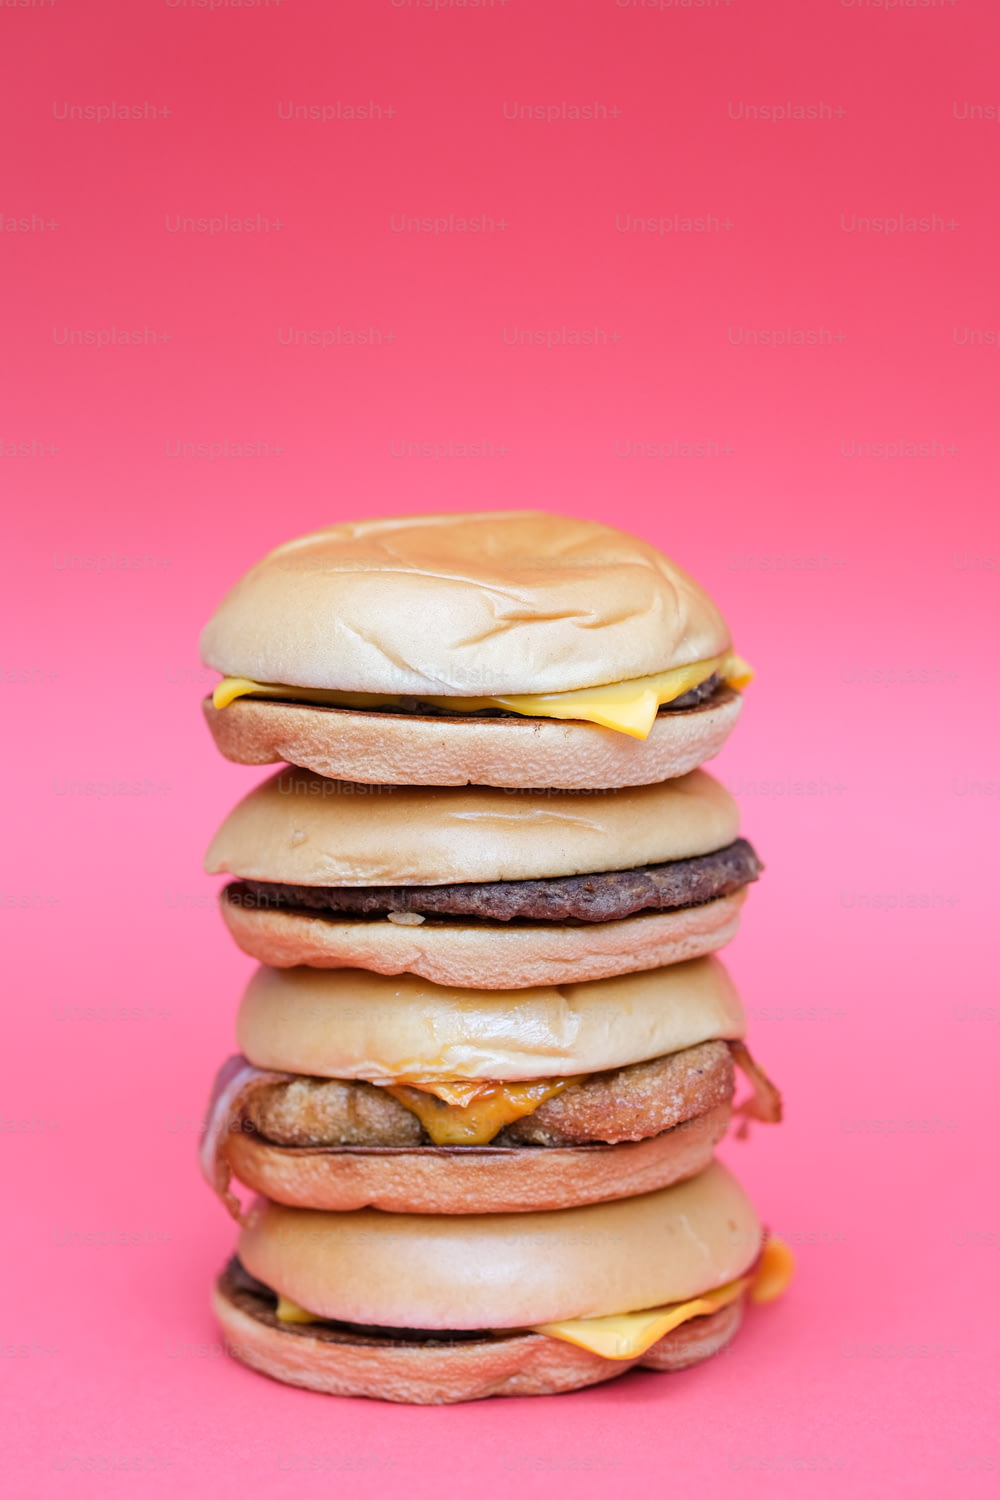 a stack of hamburgers on a pink background